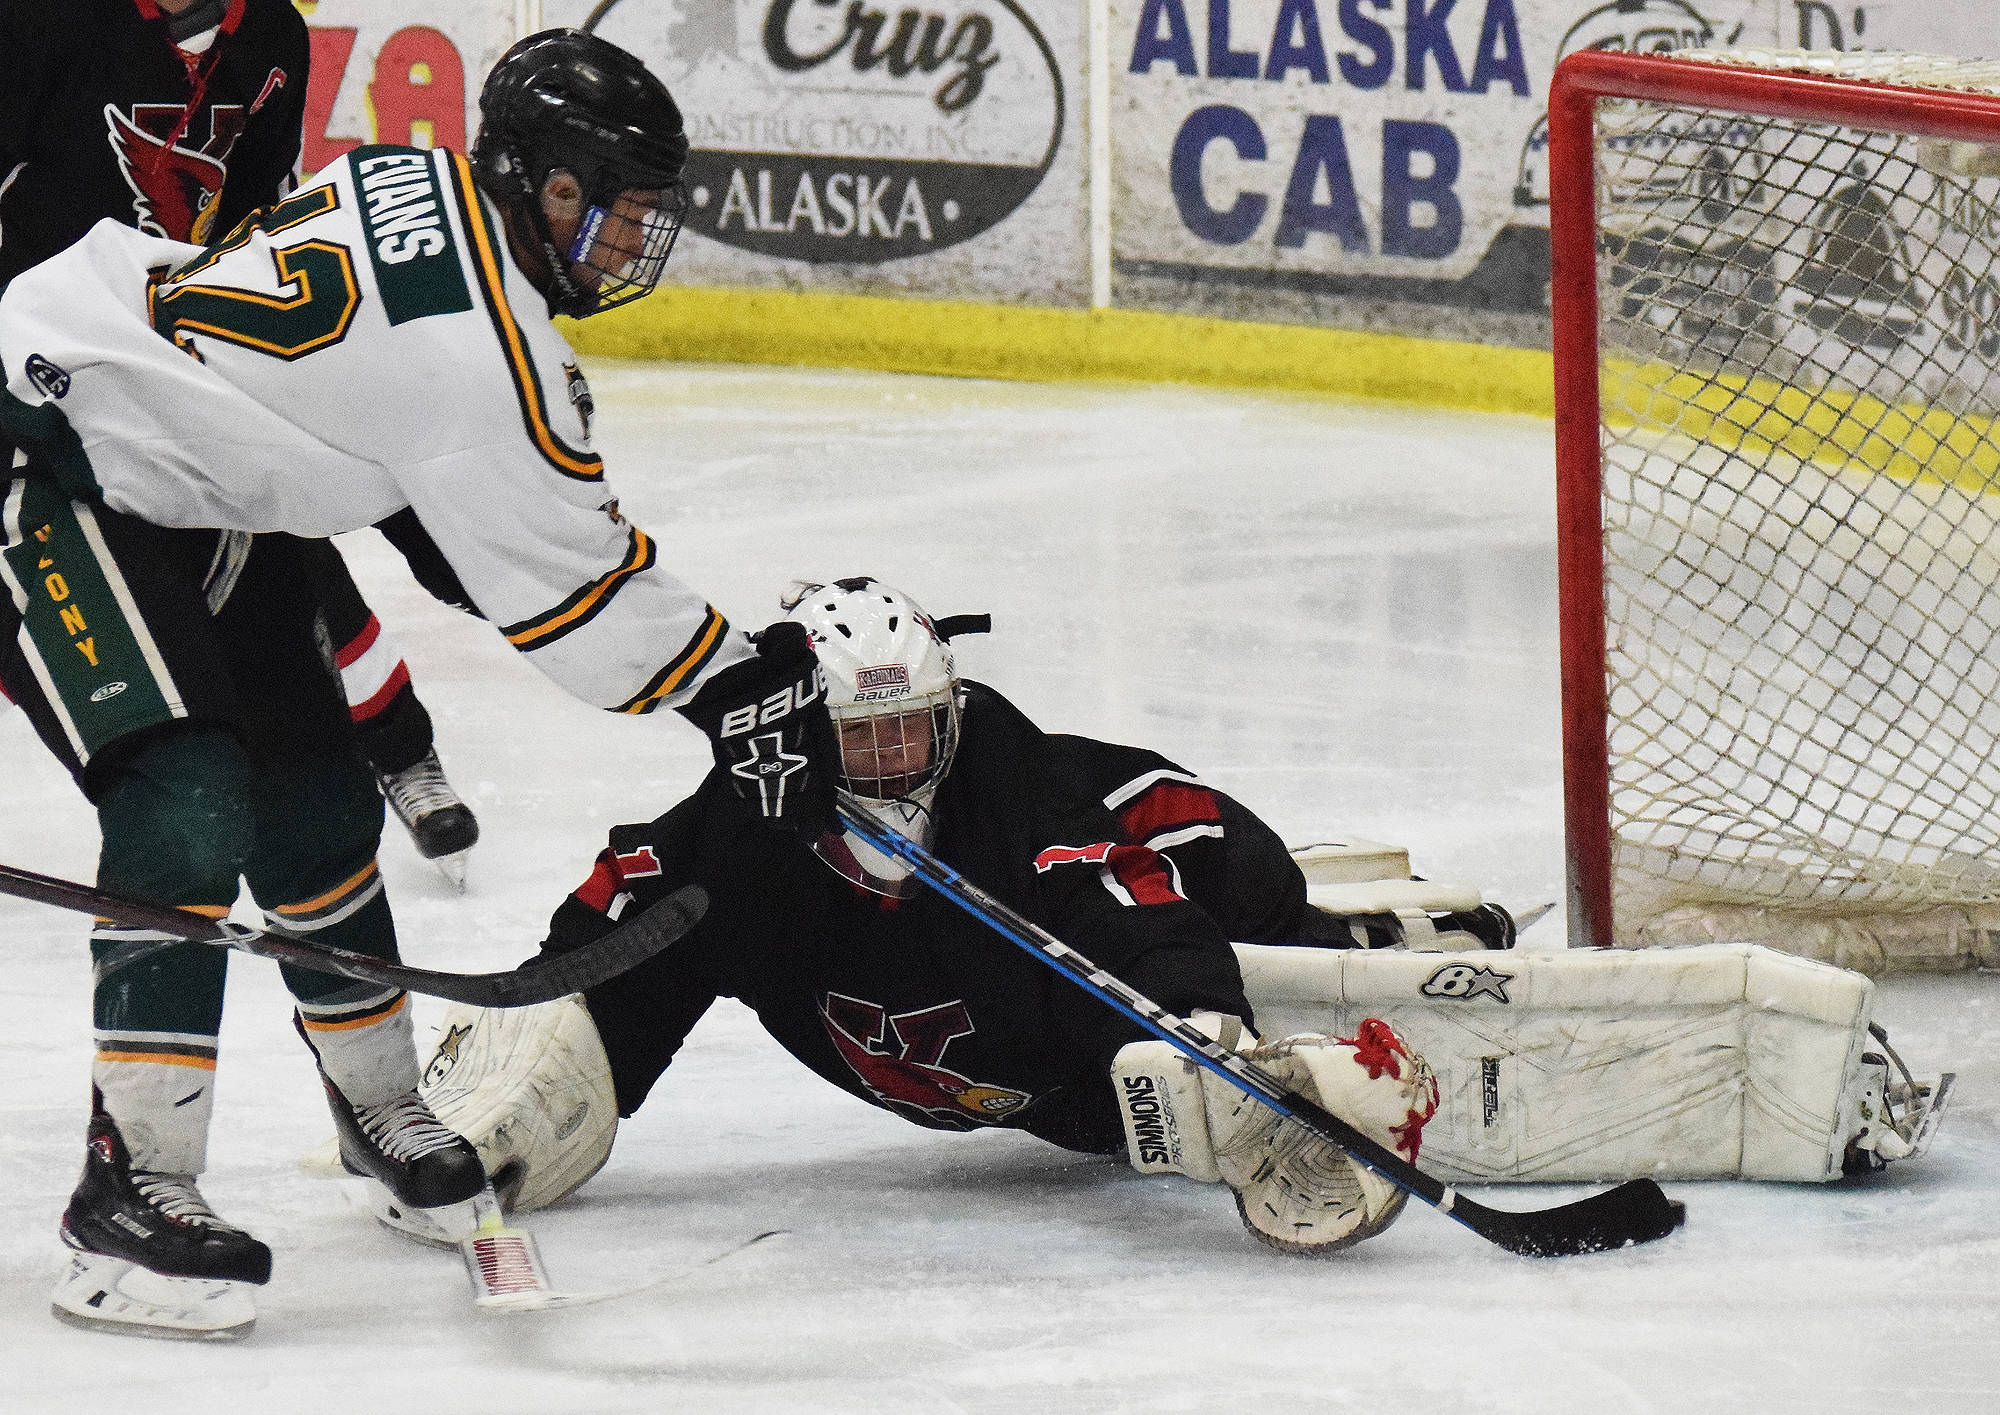 Kenai Central goalie Josh Tree blocks a shot from Colony’s Tae’jean Evans Friday in a North Star Conference tournament semifinal at the Soldotna Regional Sports Complex. (Photo by Joey Klecka/Peninsula Clarion)